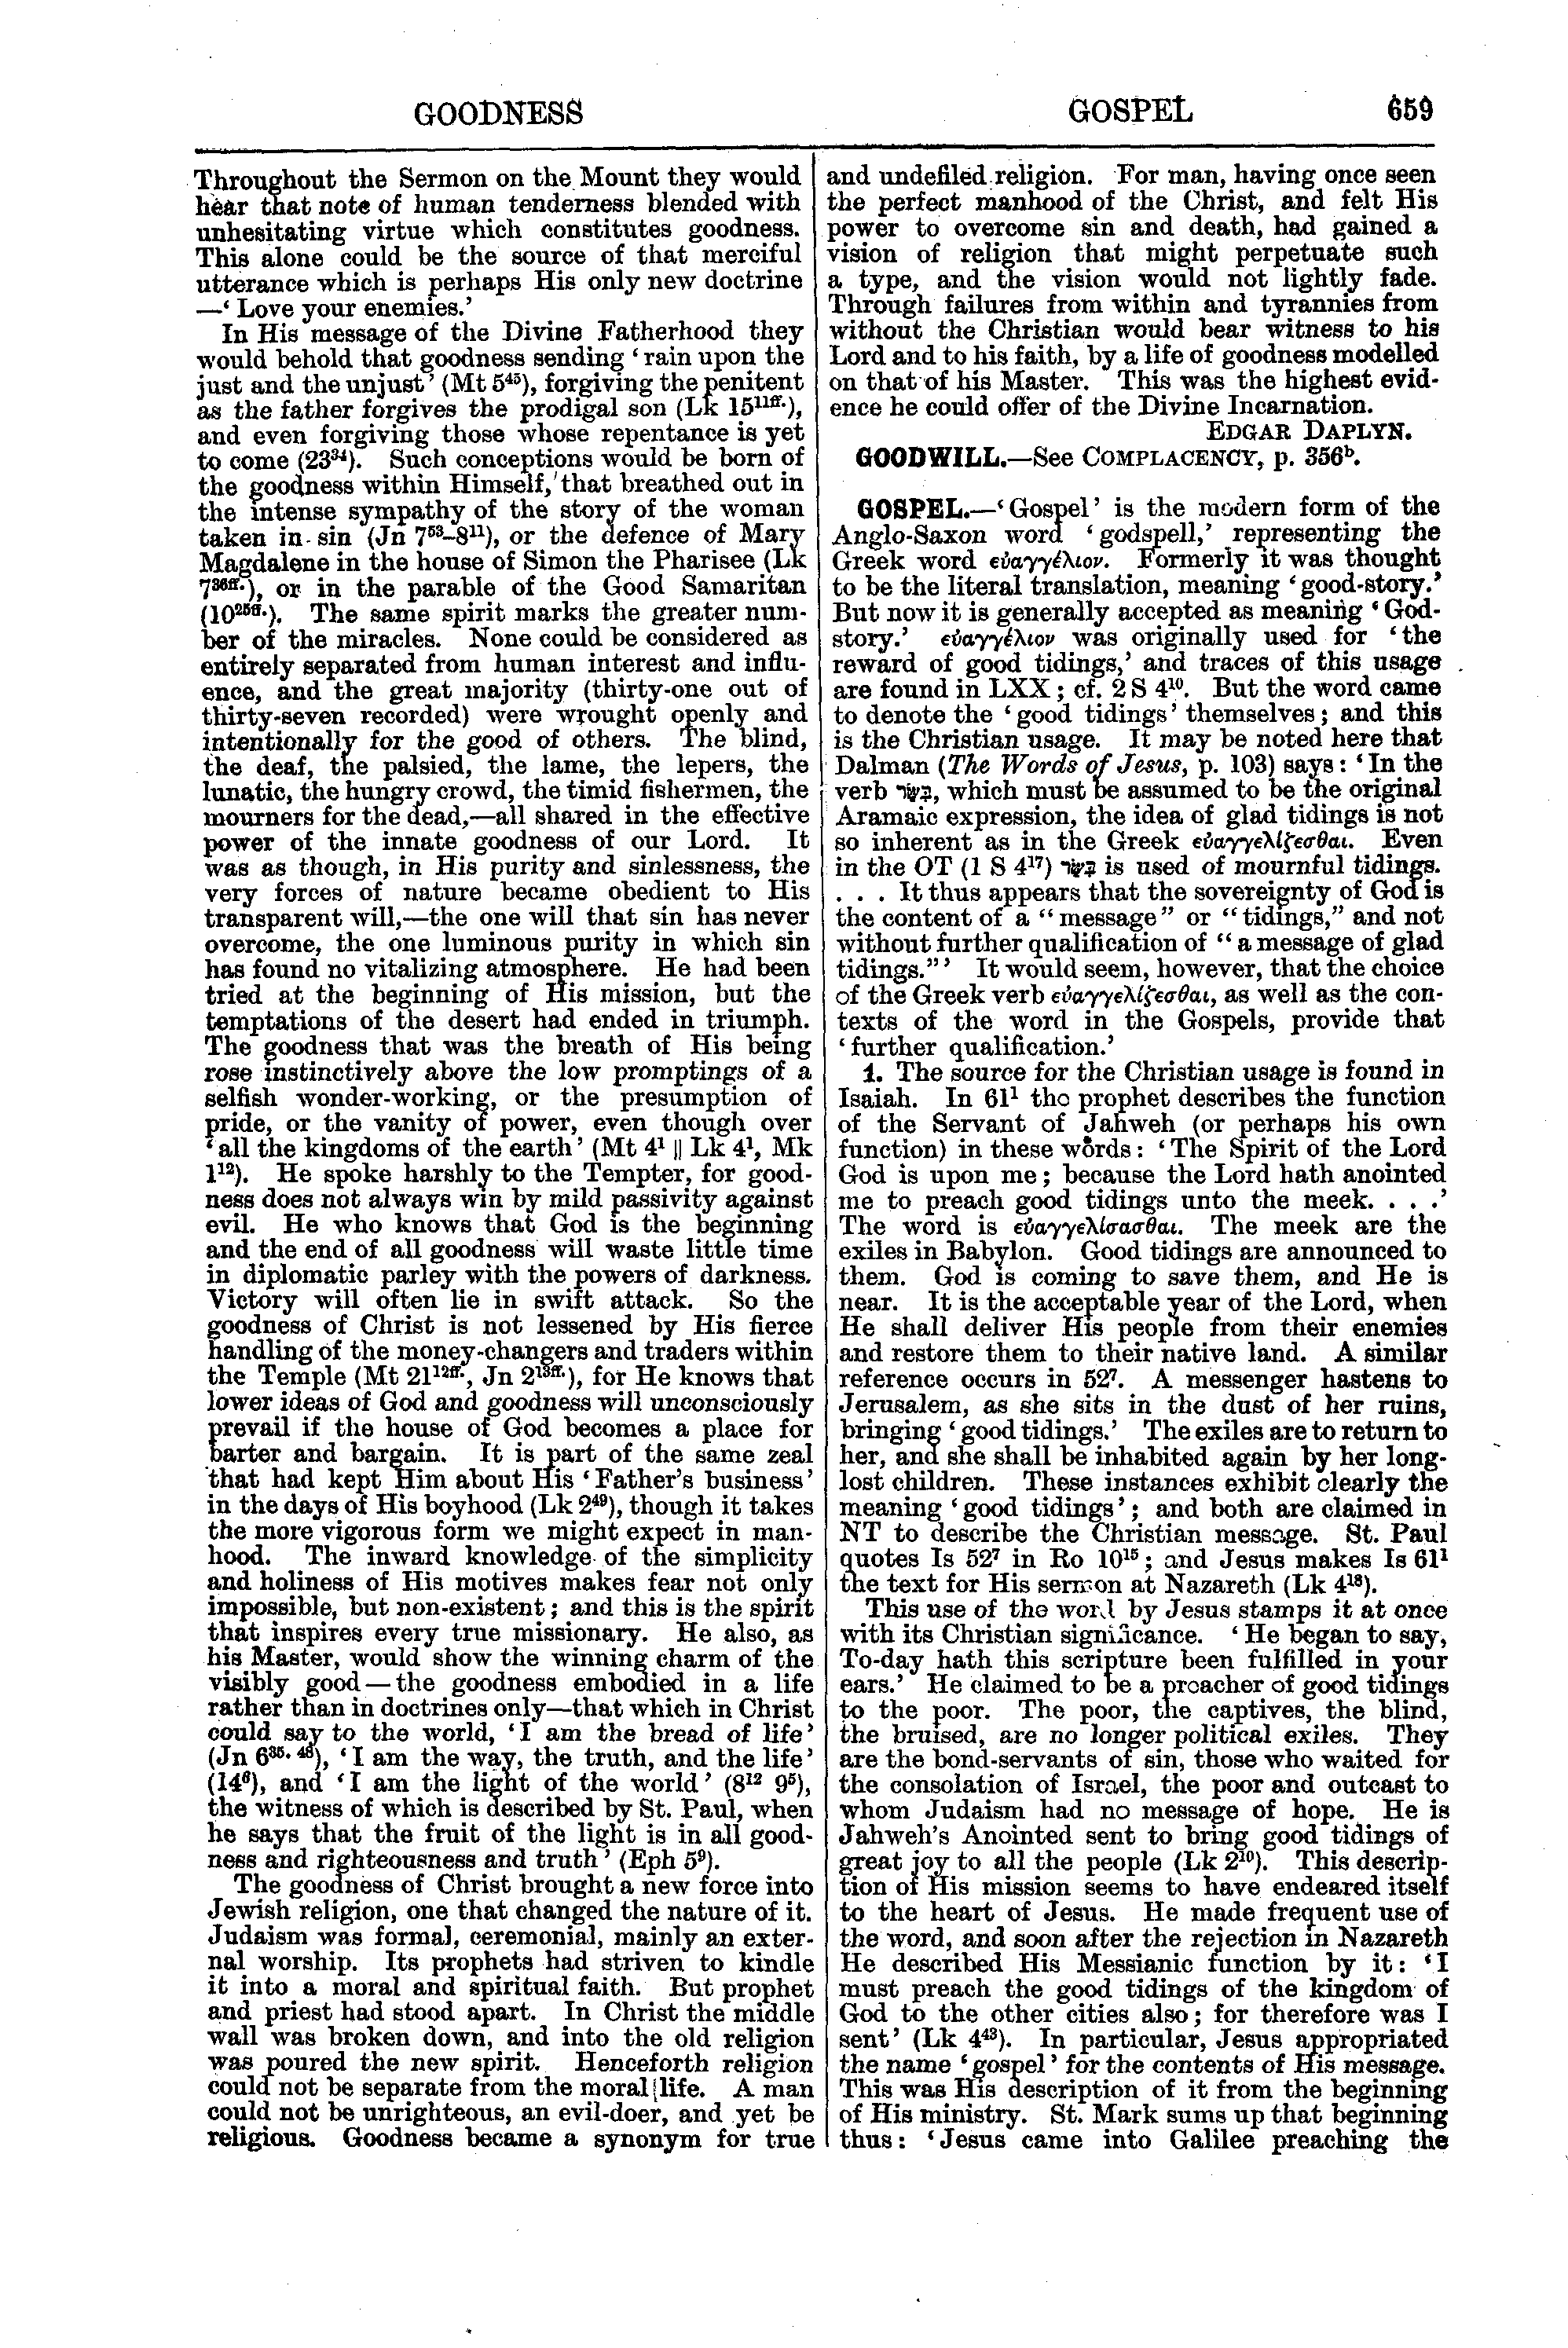 Image of page 659